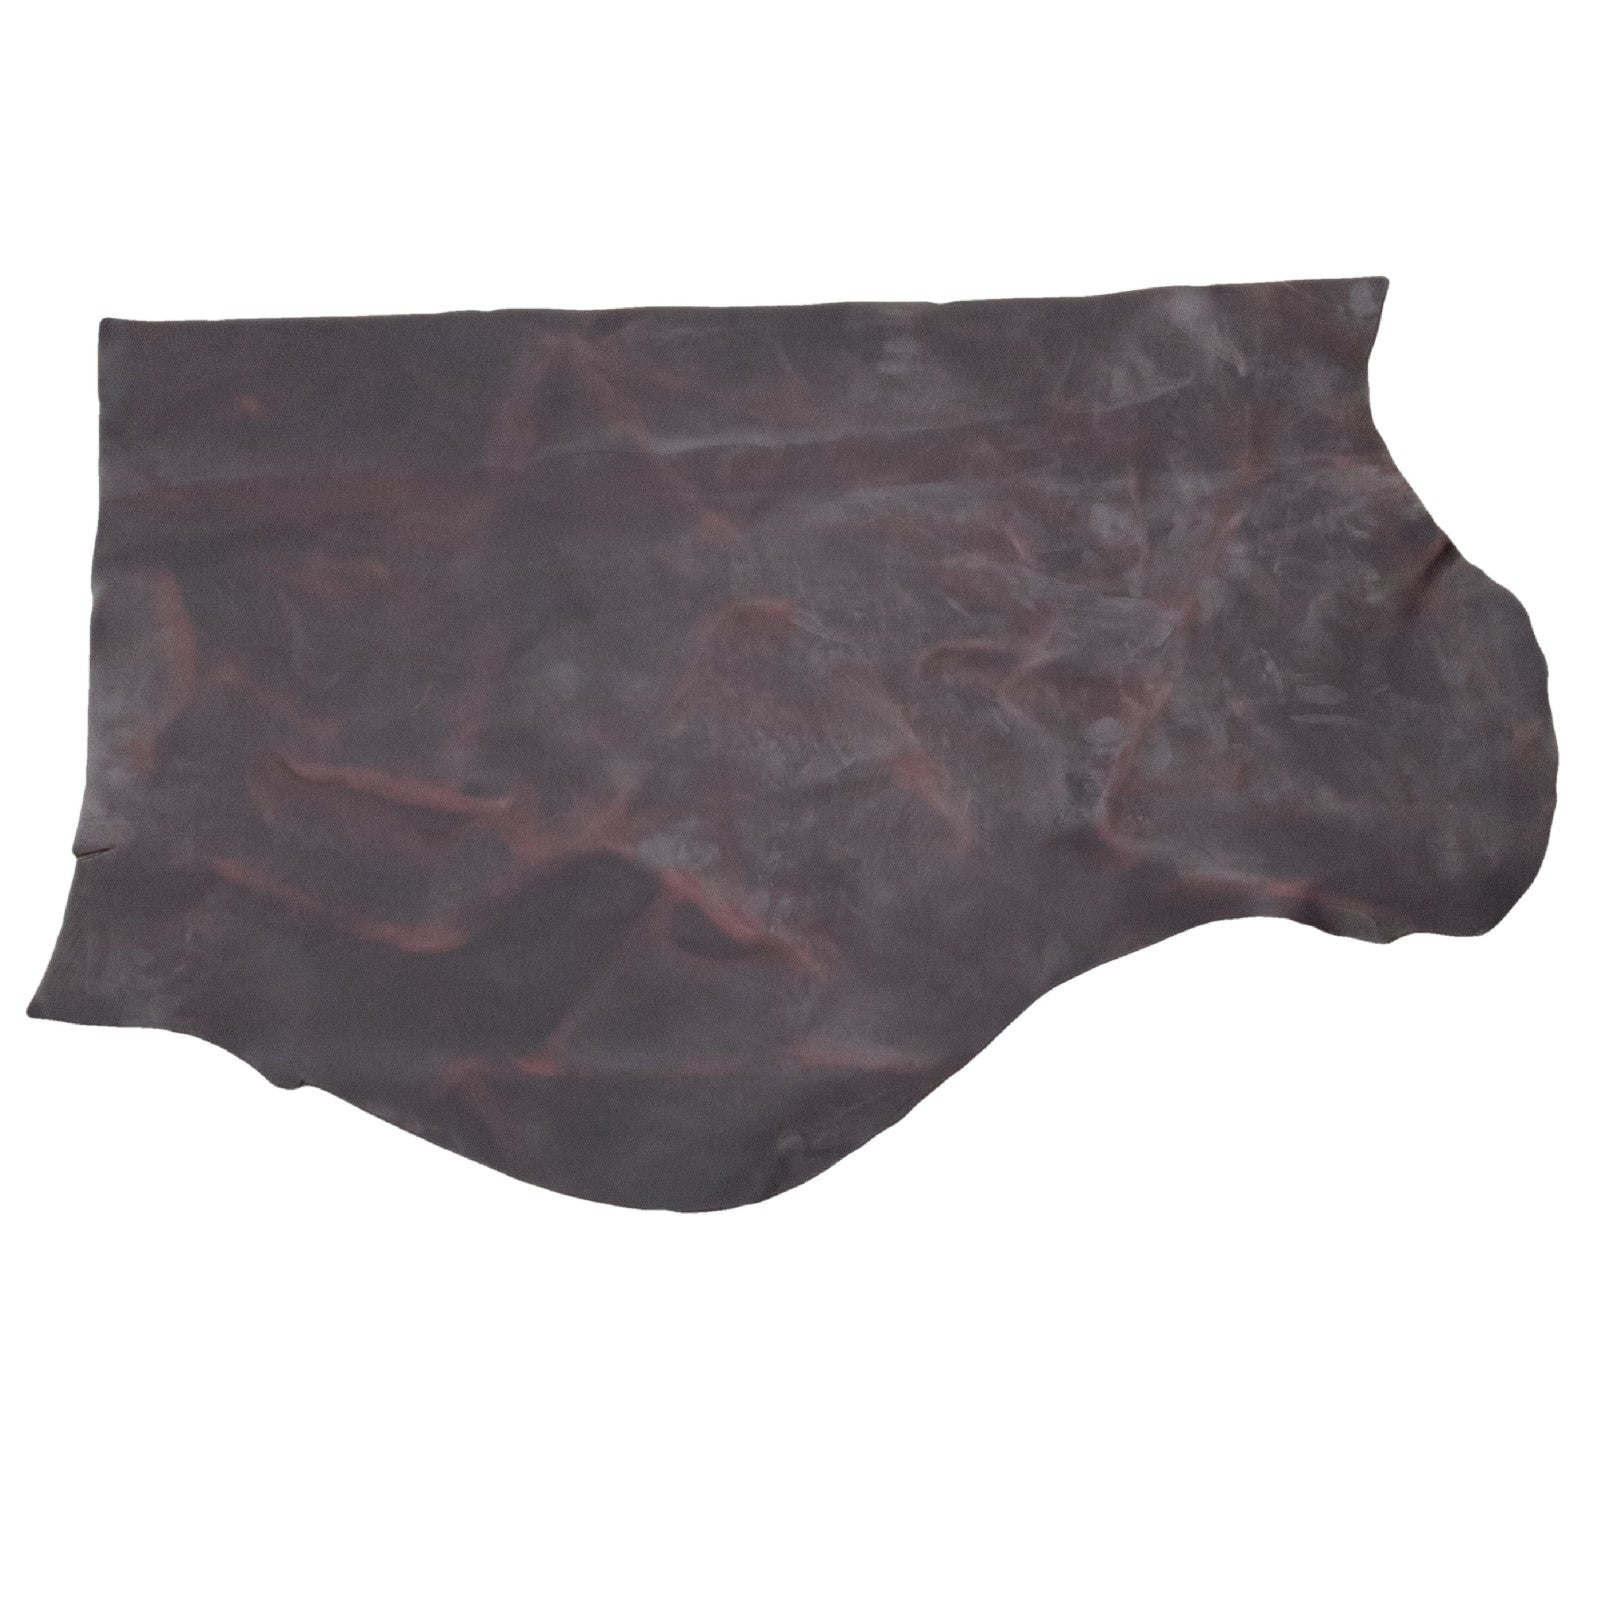 Excalibur (Black Cherry), SB Foot, Non-stock, 5-6 oz, Oil Tanned Hides, Bottom Piece / 6.5 - 7.5 Sq Ft | The Leather Guy